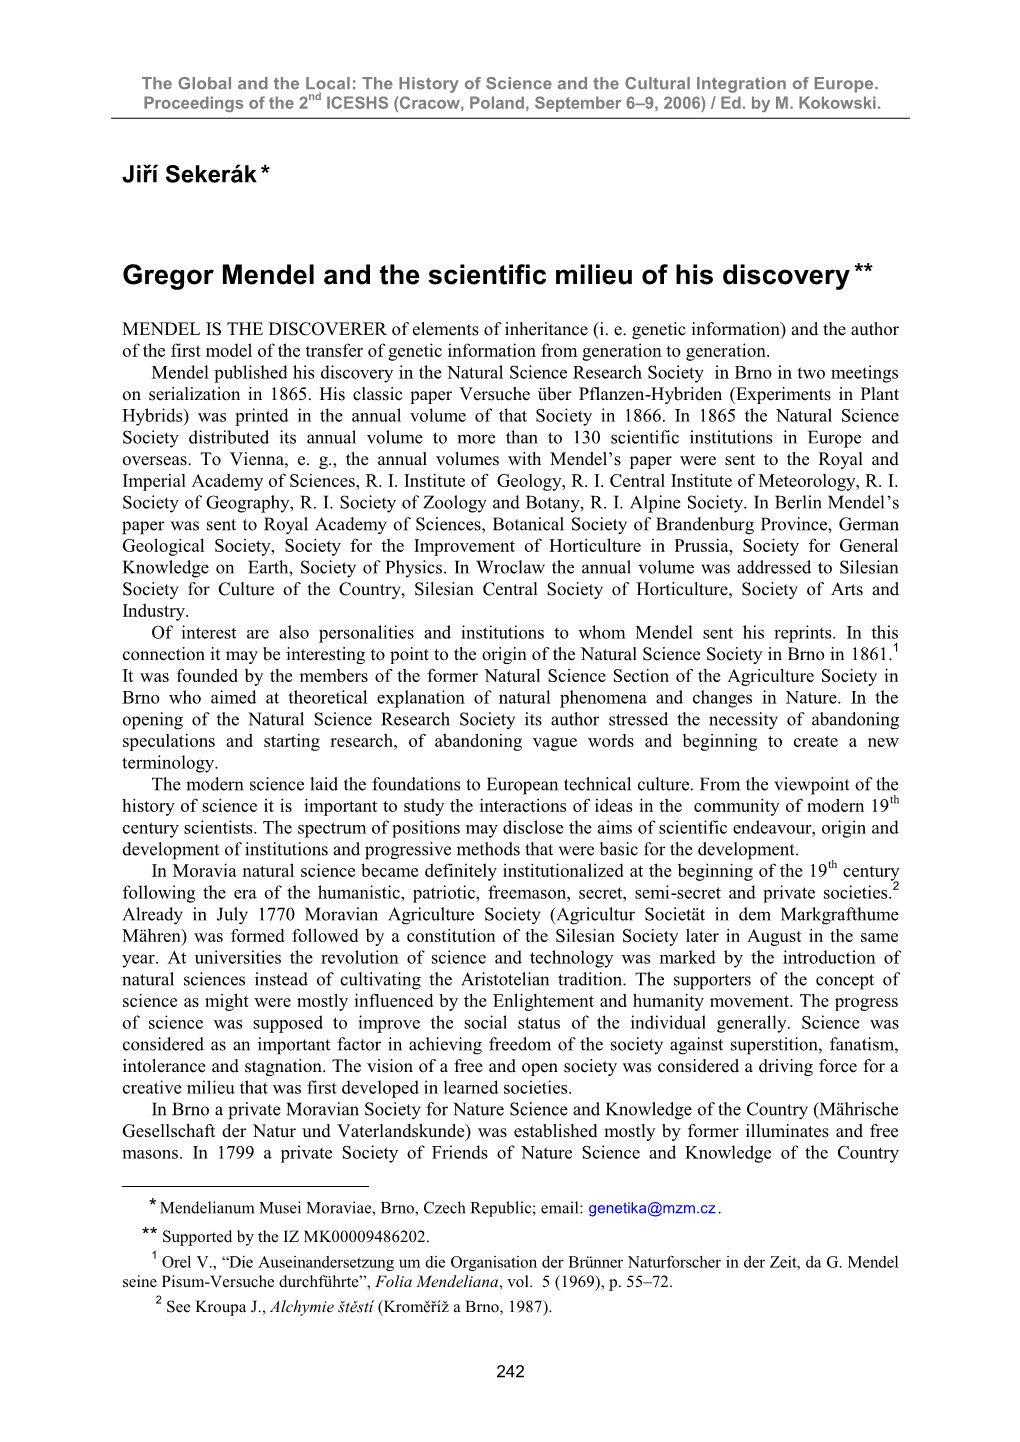 Gregor Mendel and the Scientific Milieu of His Discovery **